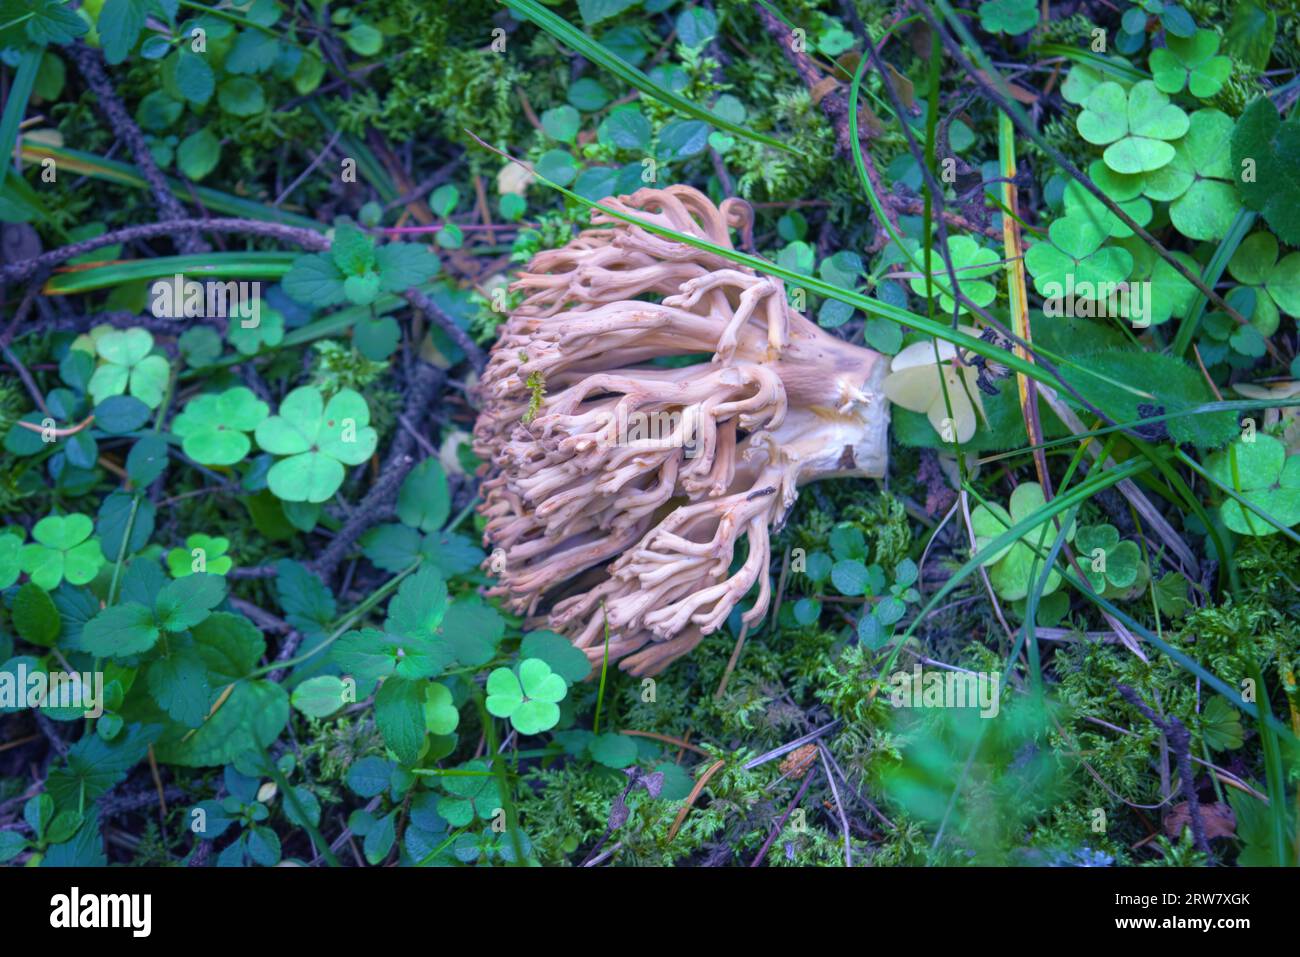 Ramaria formosa mushroom, commonly known as the beautiful clavaria or pink coral fungus. Stock Photo